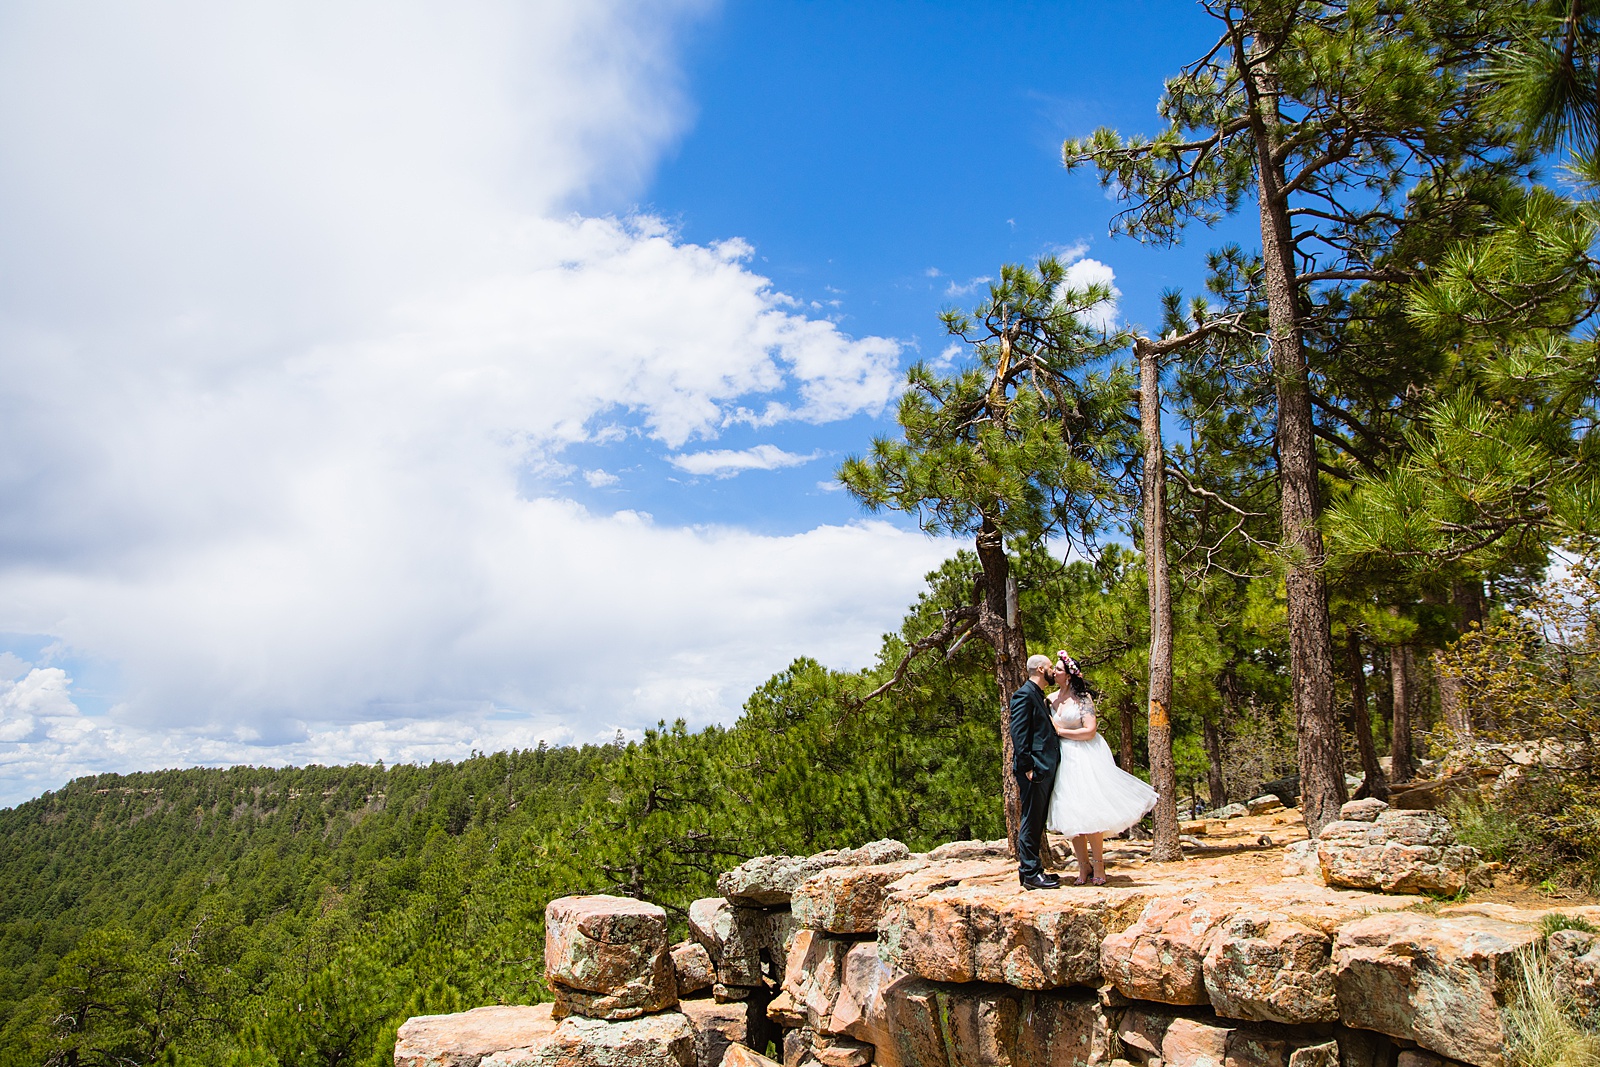 Bride and groom kiss at the edge of the rim during their elopement at the Mogollon Rim outside of Payson, Arizona by elopement photographer PMA Photography.